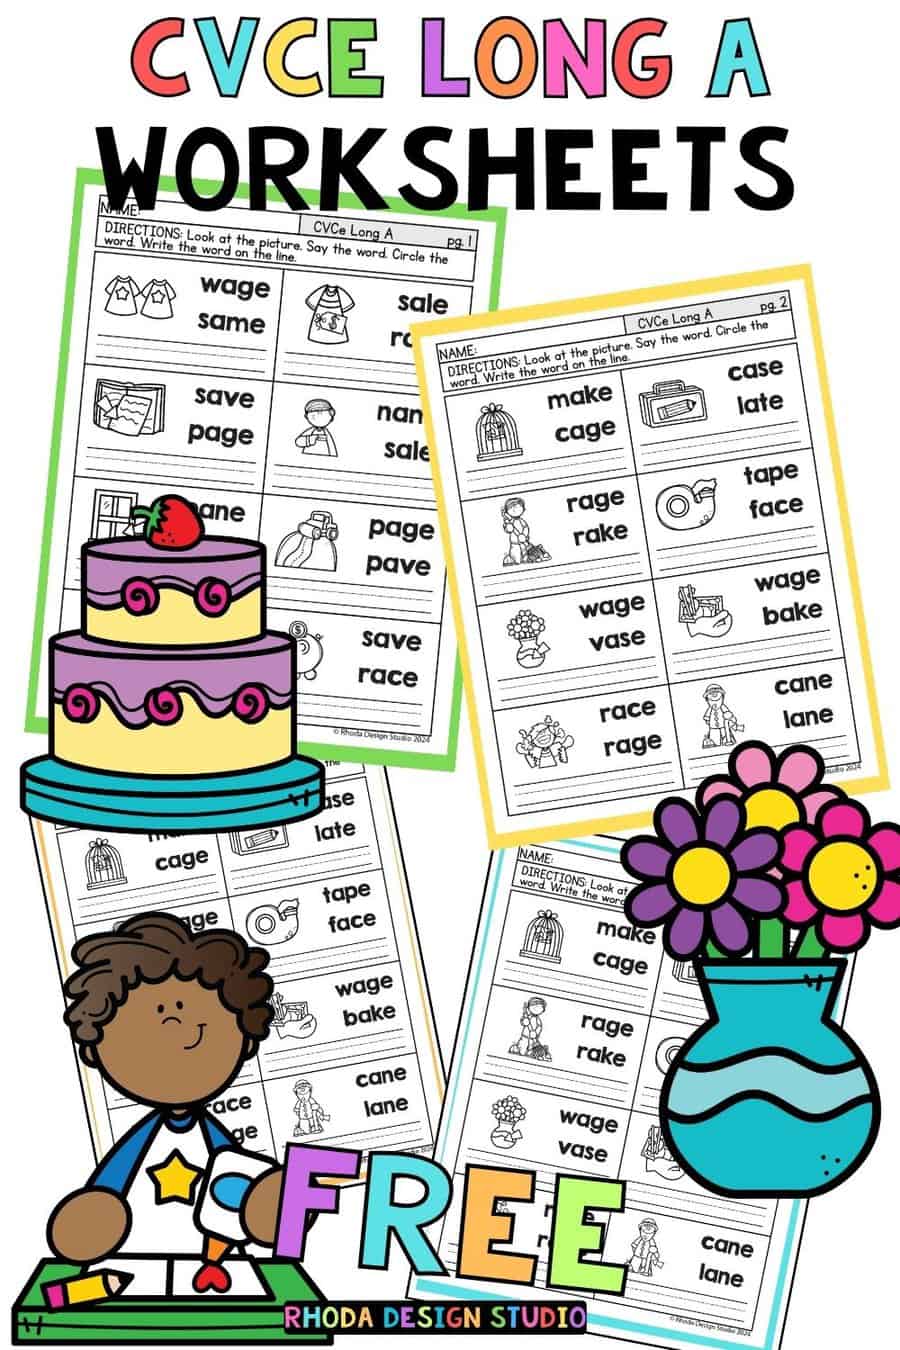 CVCe Words: A Set of Free Long A Worksheets for Educators and Parents